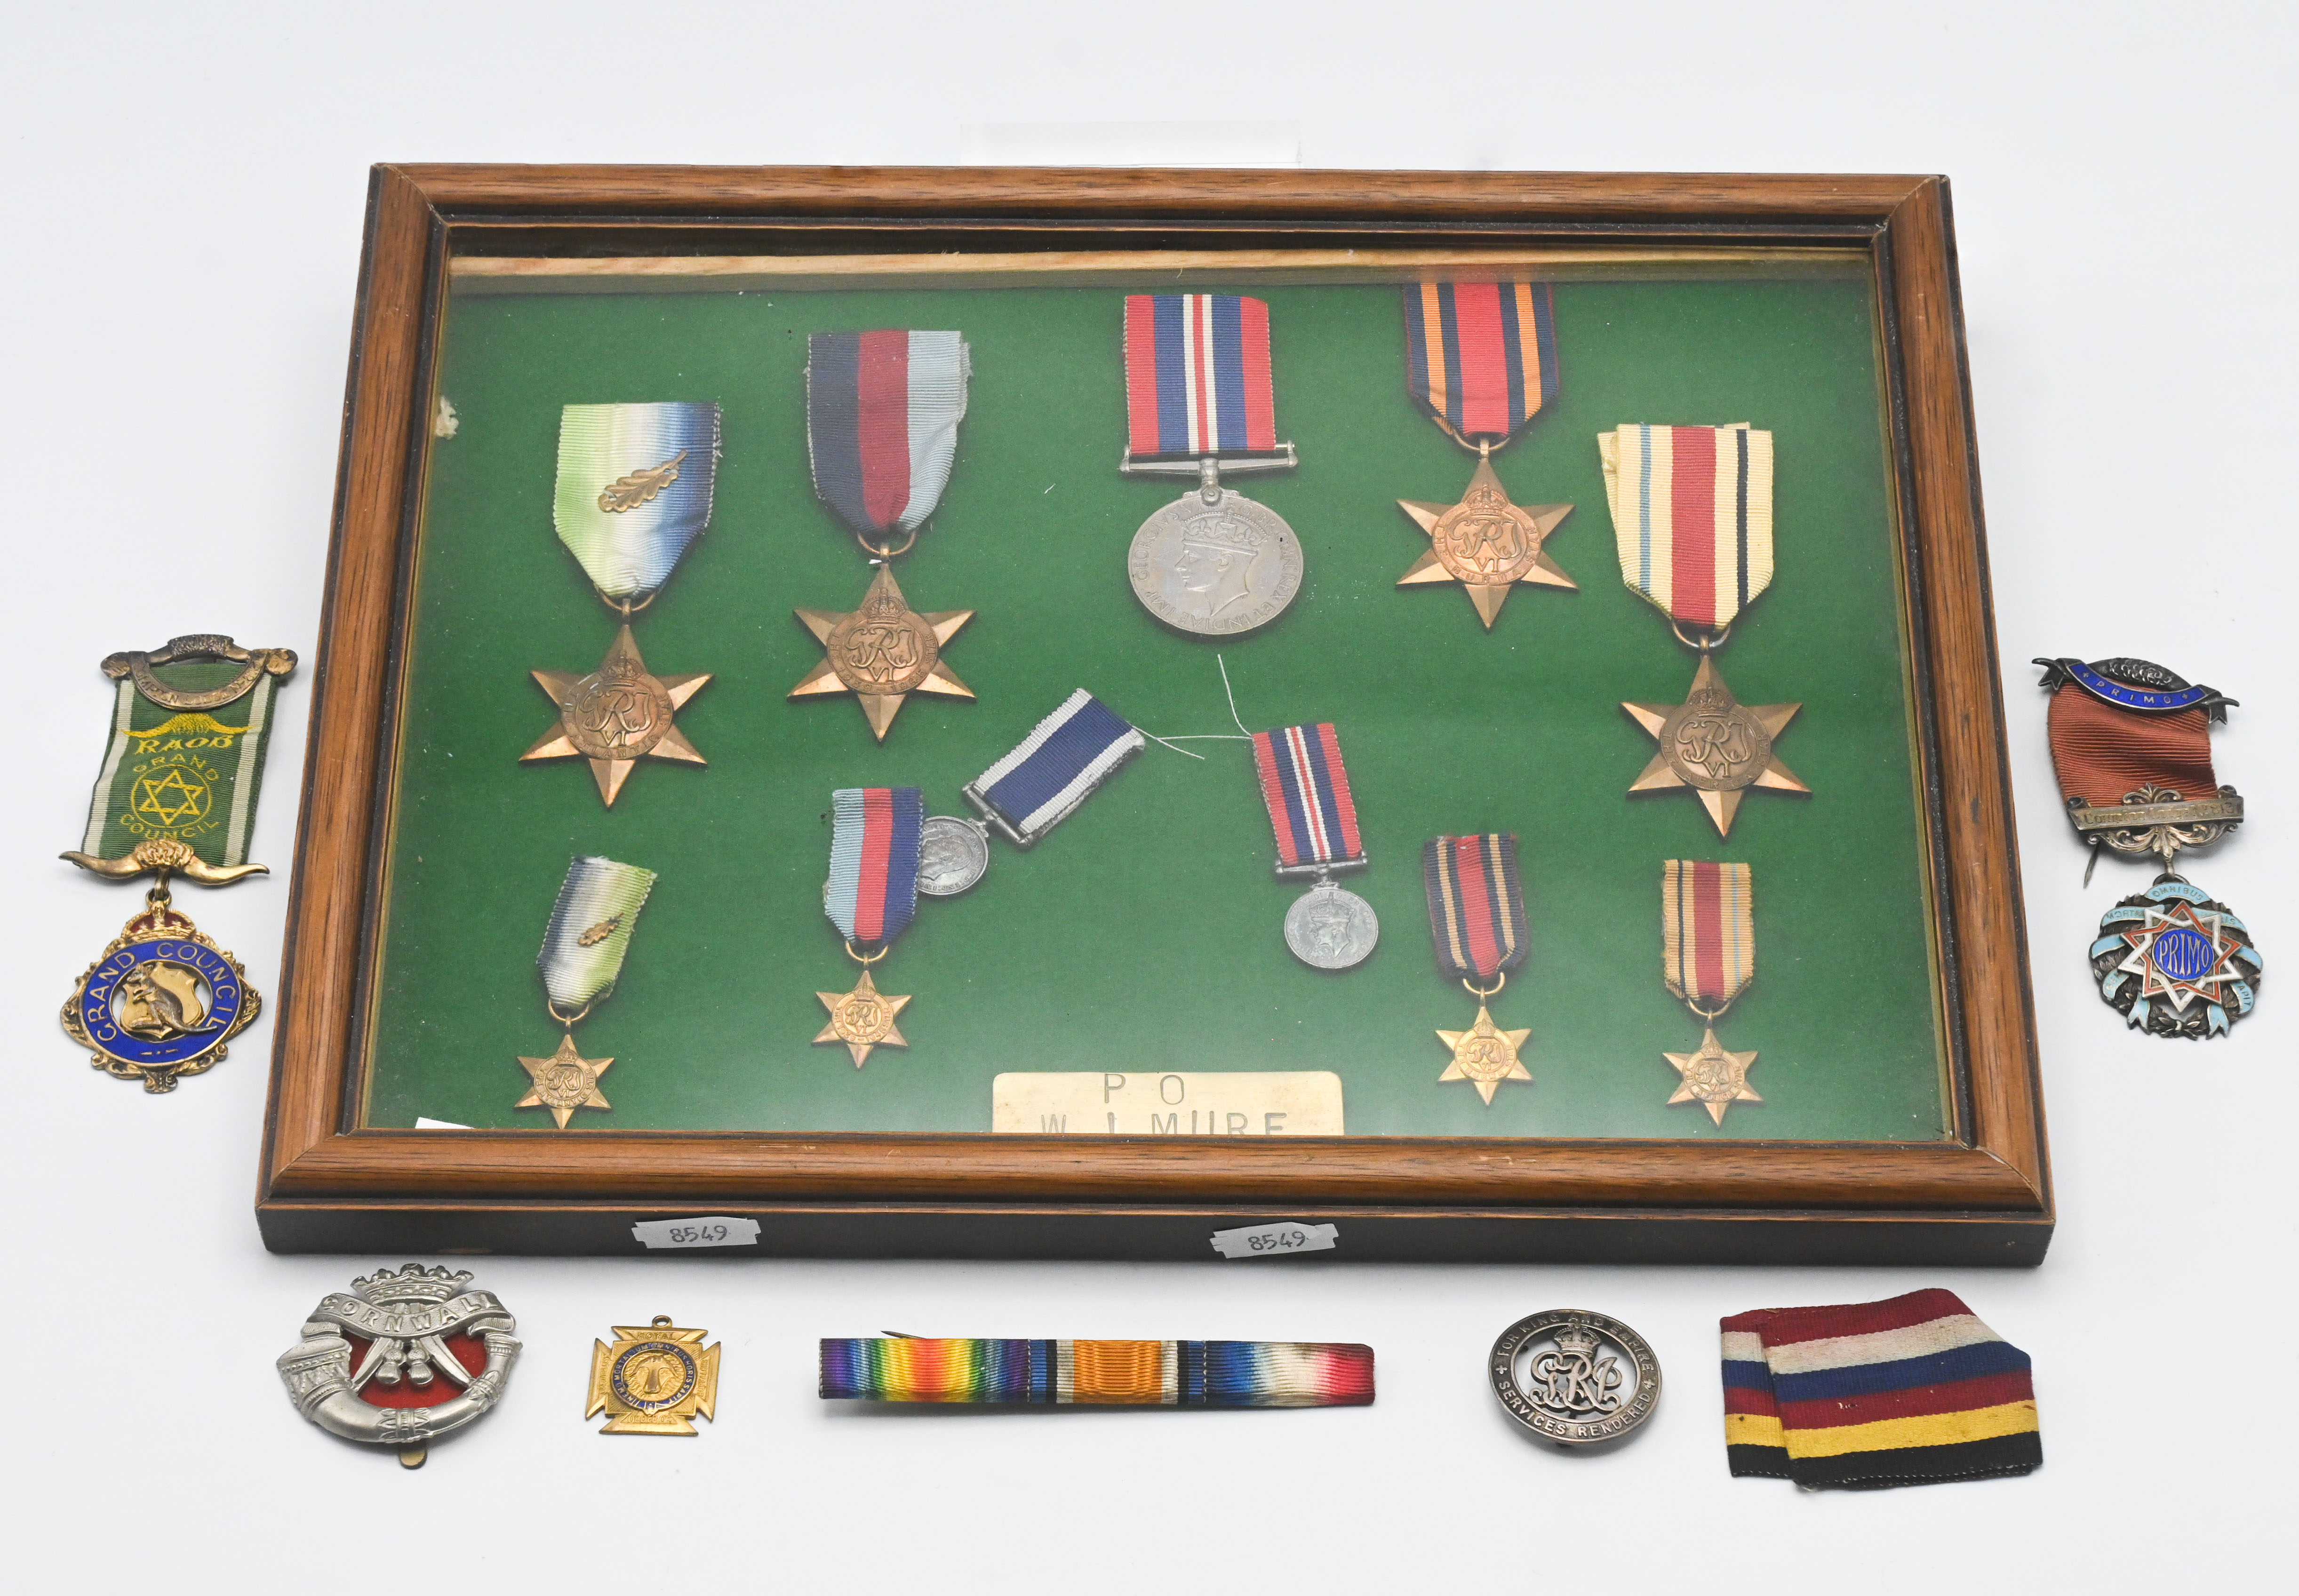 A group of WWII medals awarded to Petty Officer WJ Mure (Plymouth RN) Note Oak Leaf on the